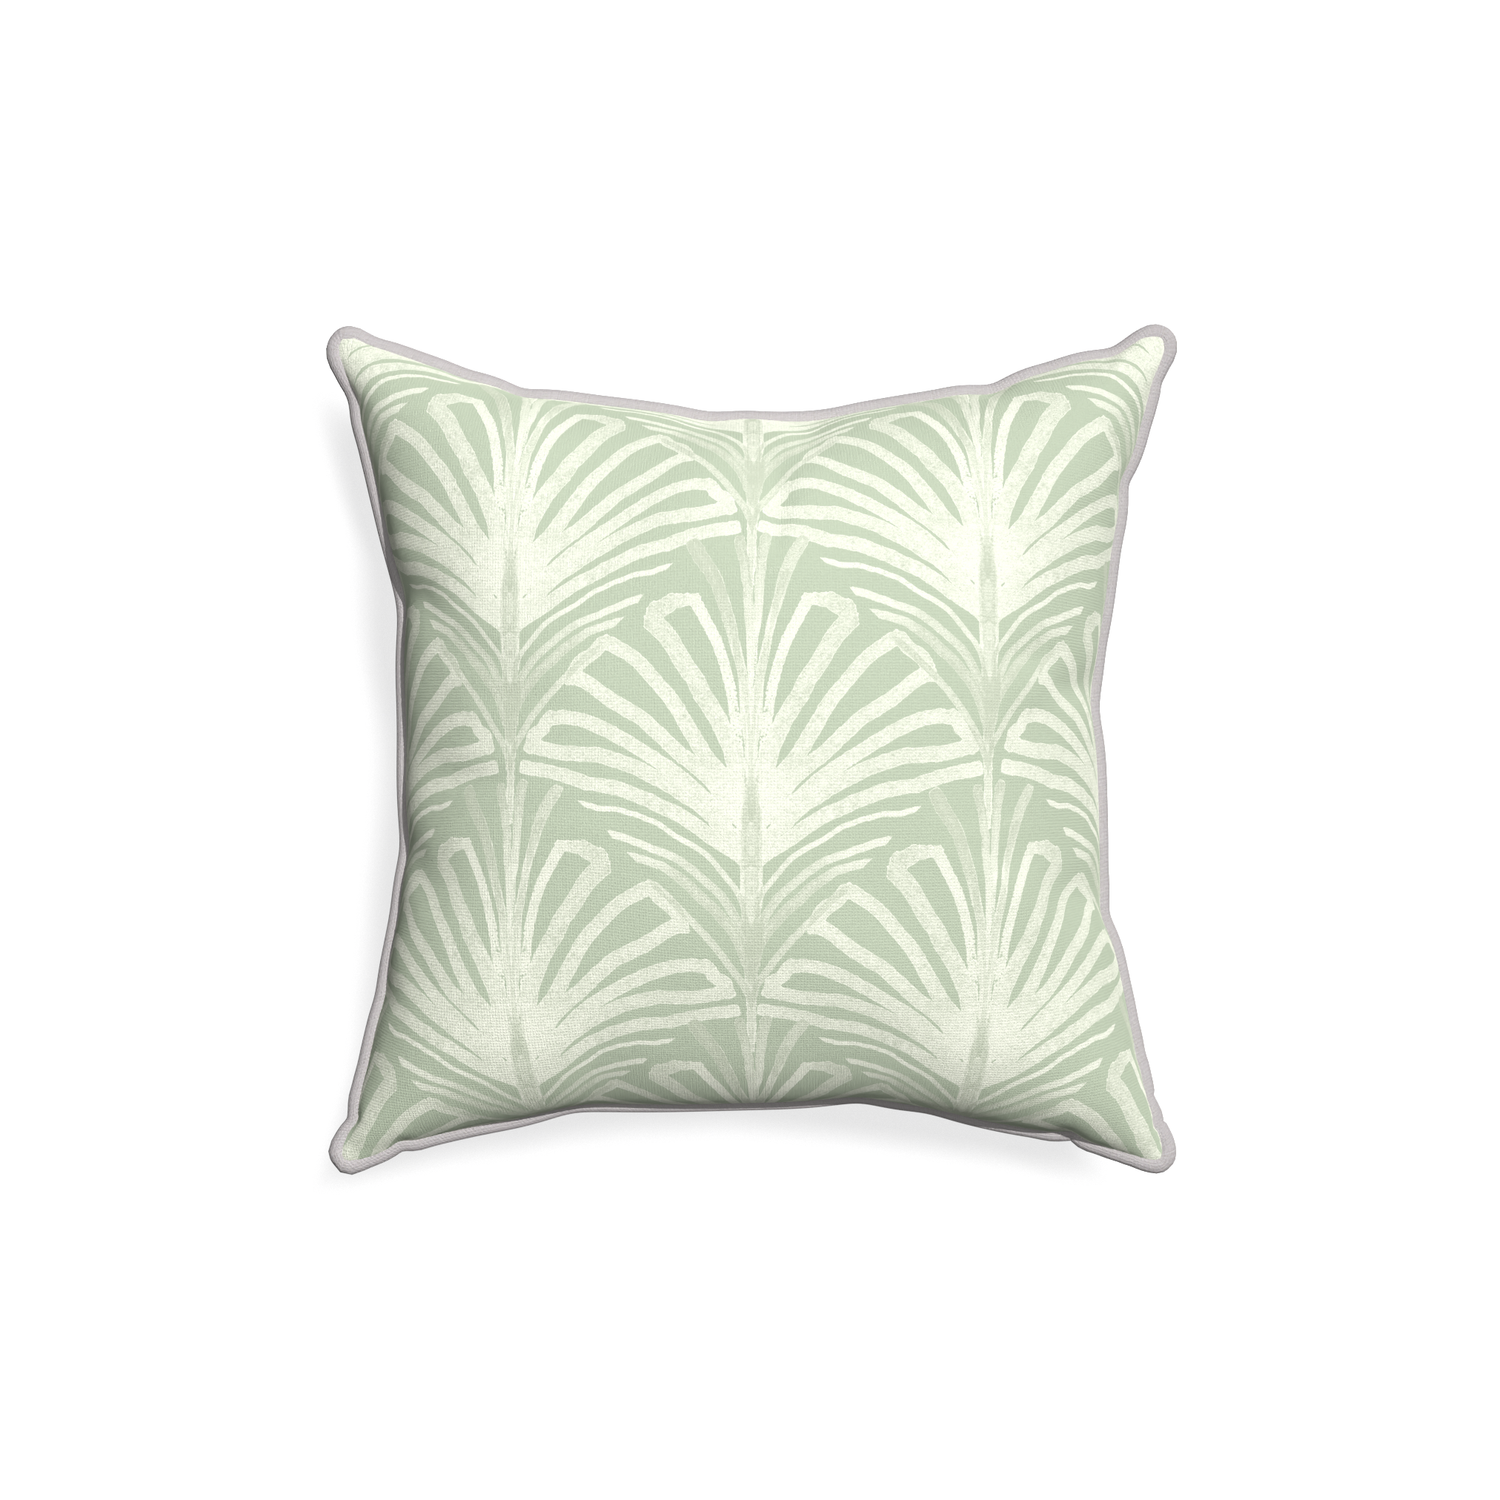 18-square suzy sage custom sage green palmpillow with pebble piping on white background